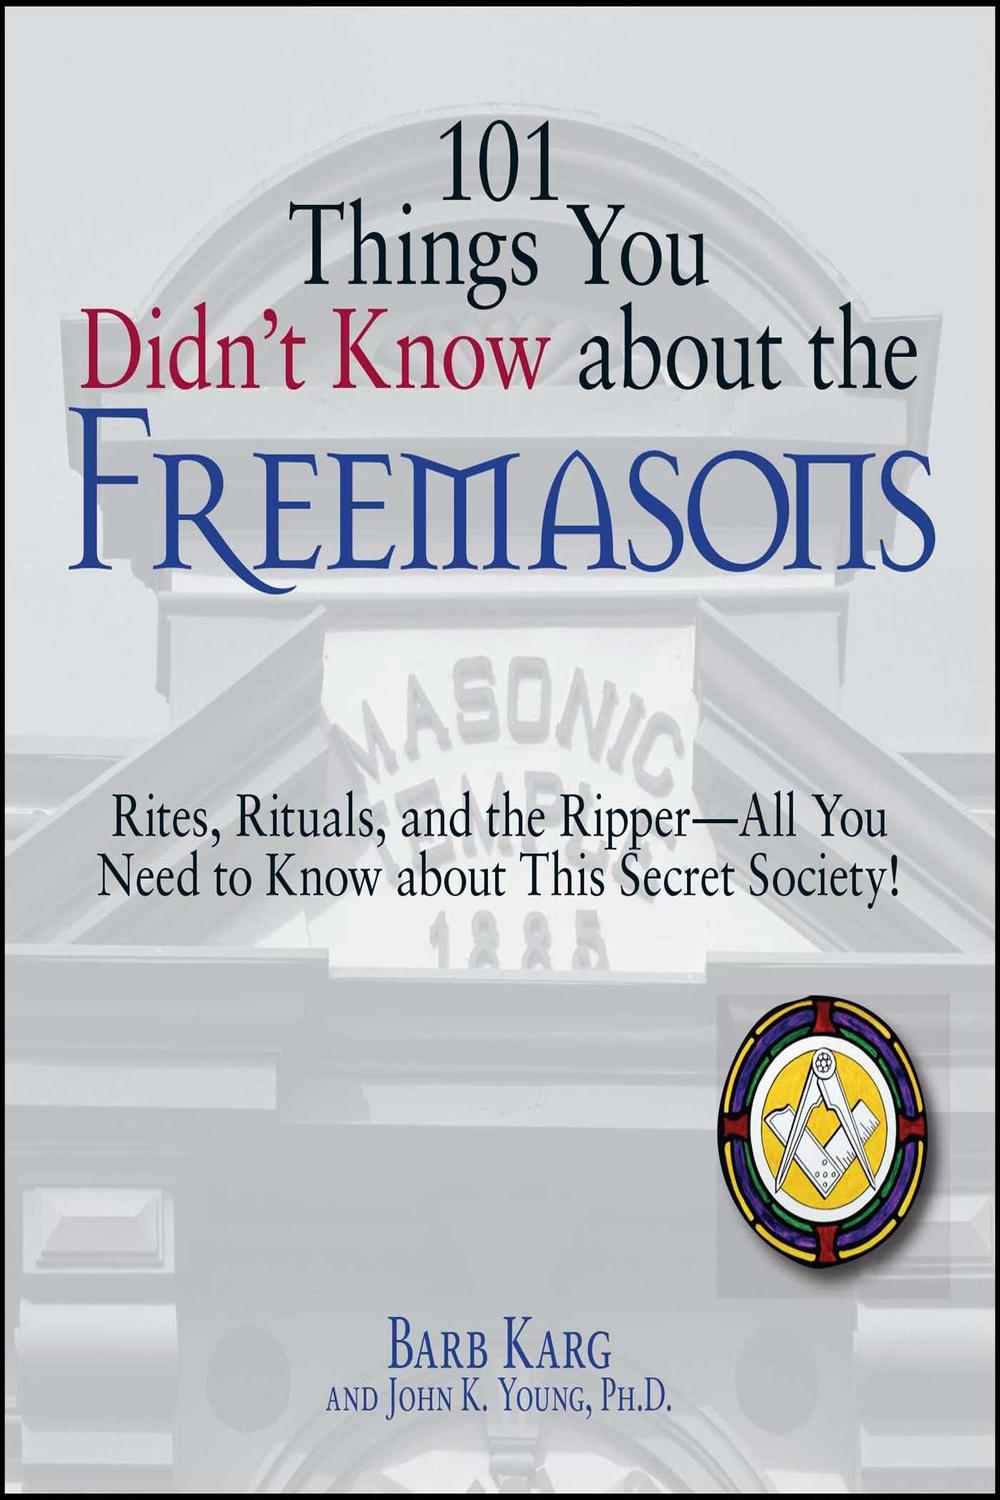 101 Things You Didn't Know About The Freemasons - Barb Karg, John K Young